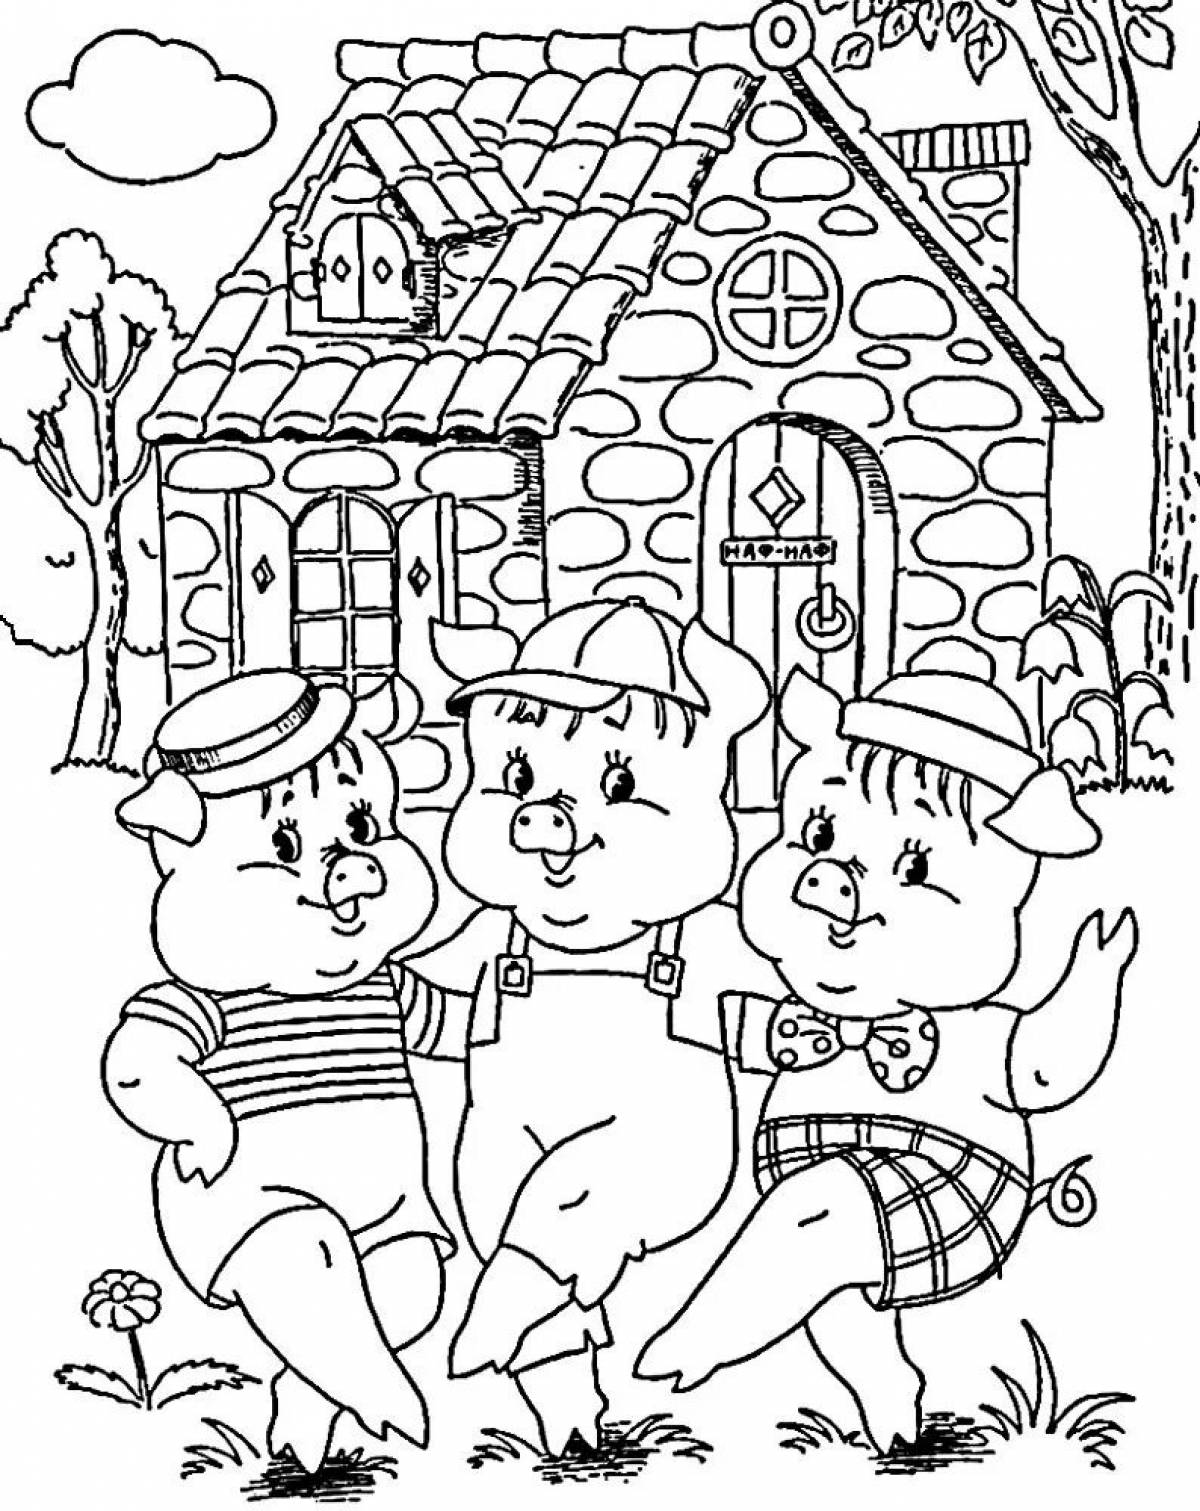 Fun coloring 3 little pigs for kids